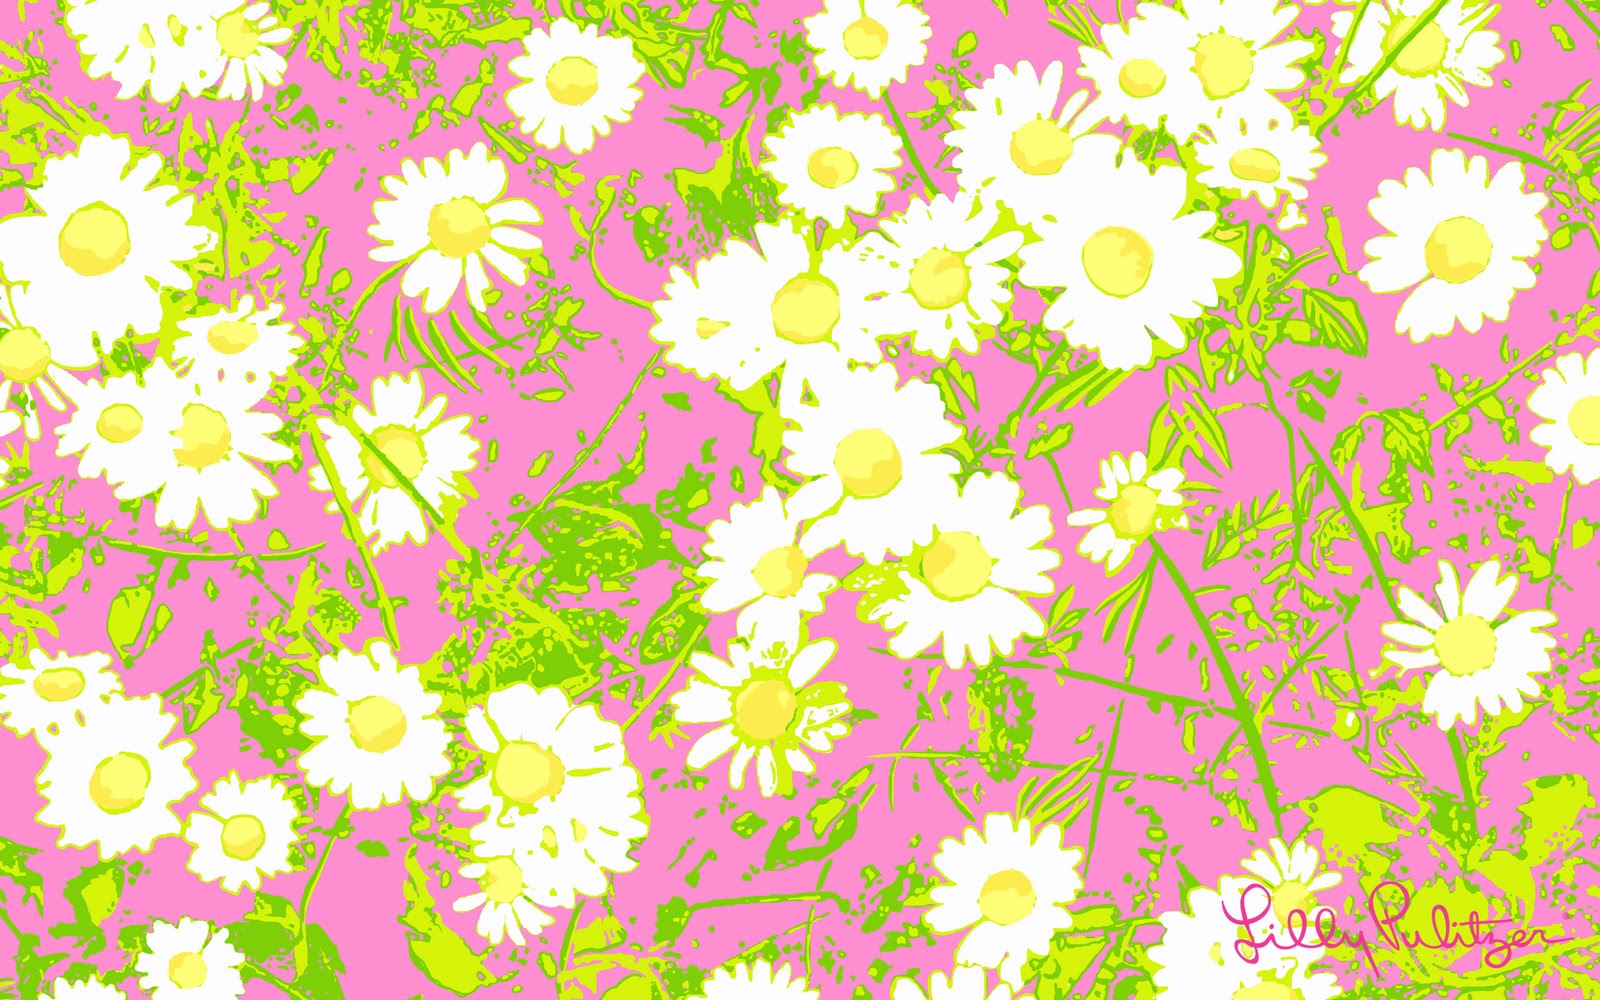 Lilly Pulitzer Stationery Sale Wallpaper Picswallpaper